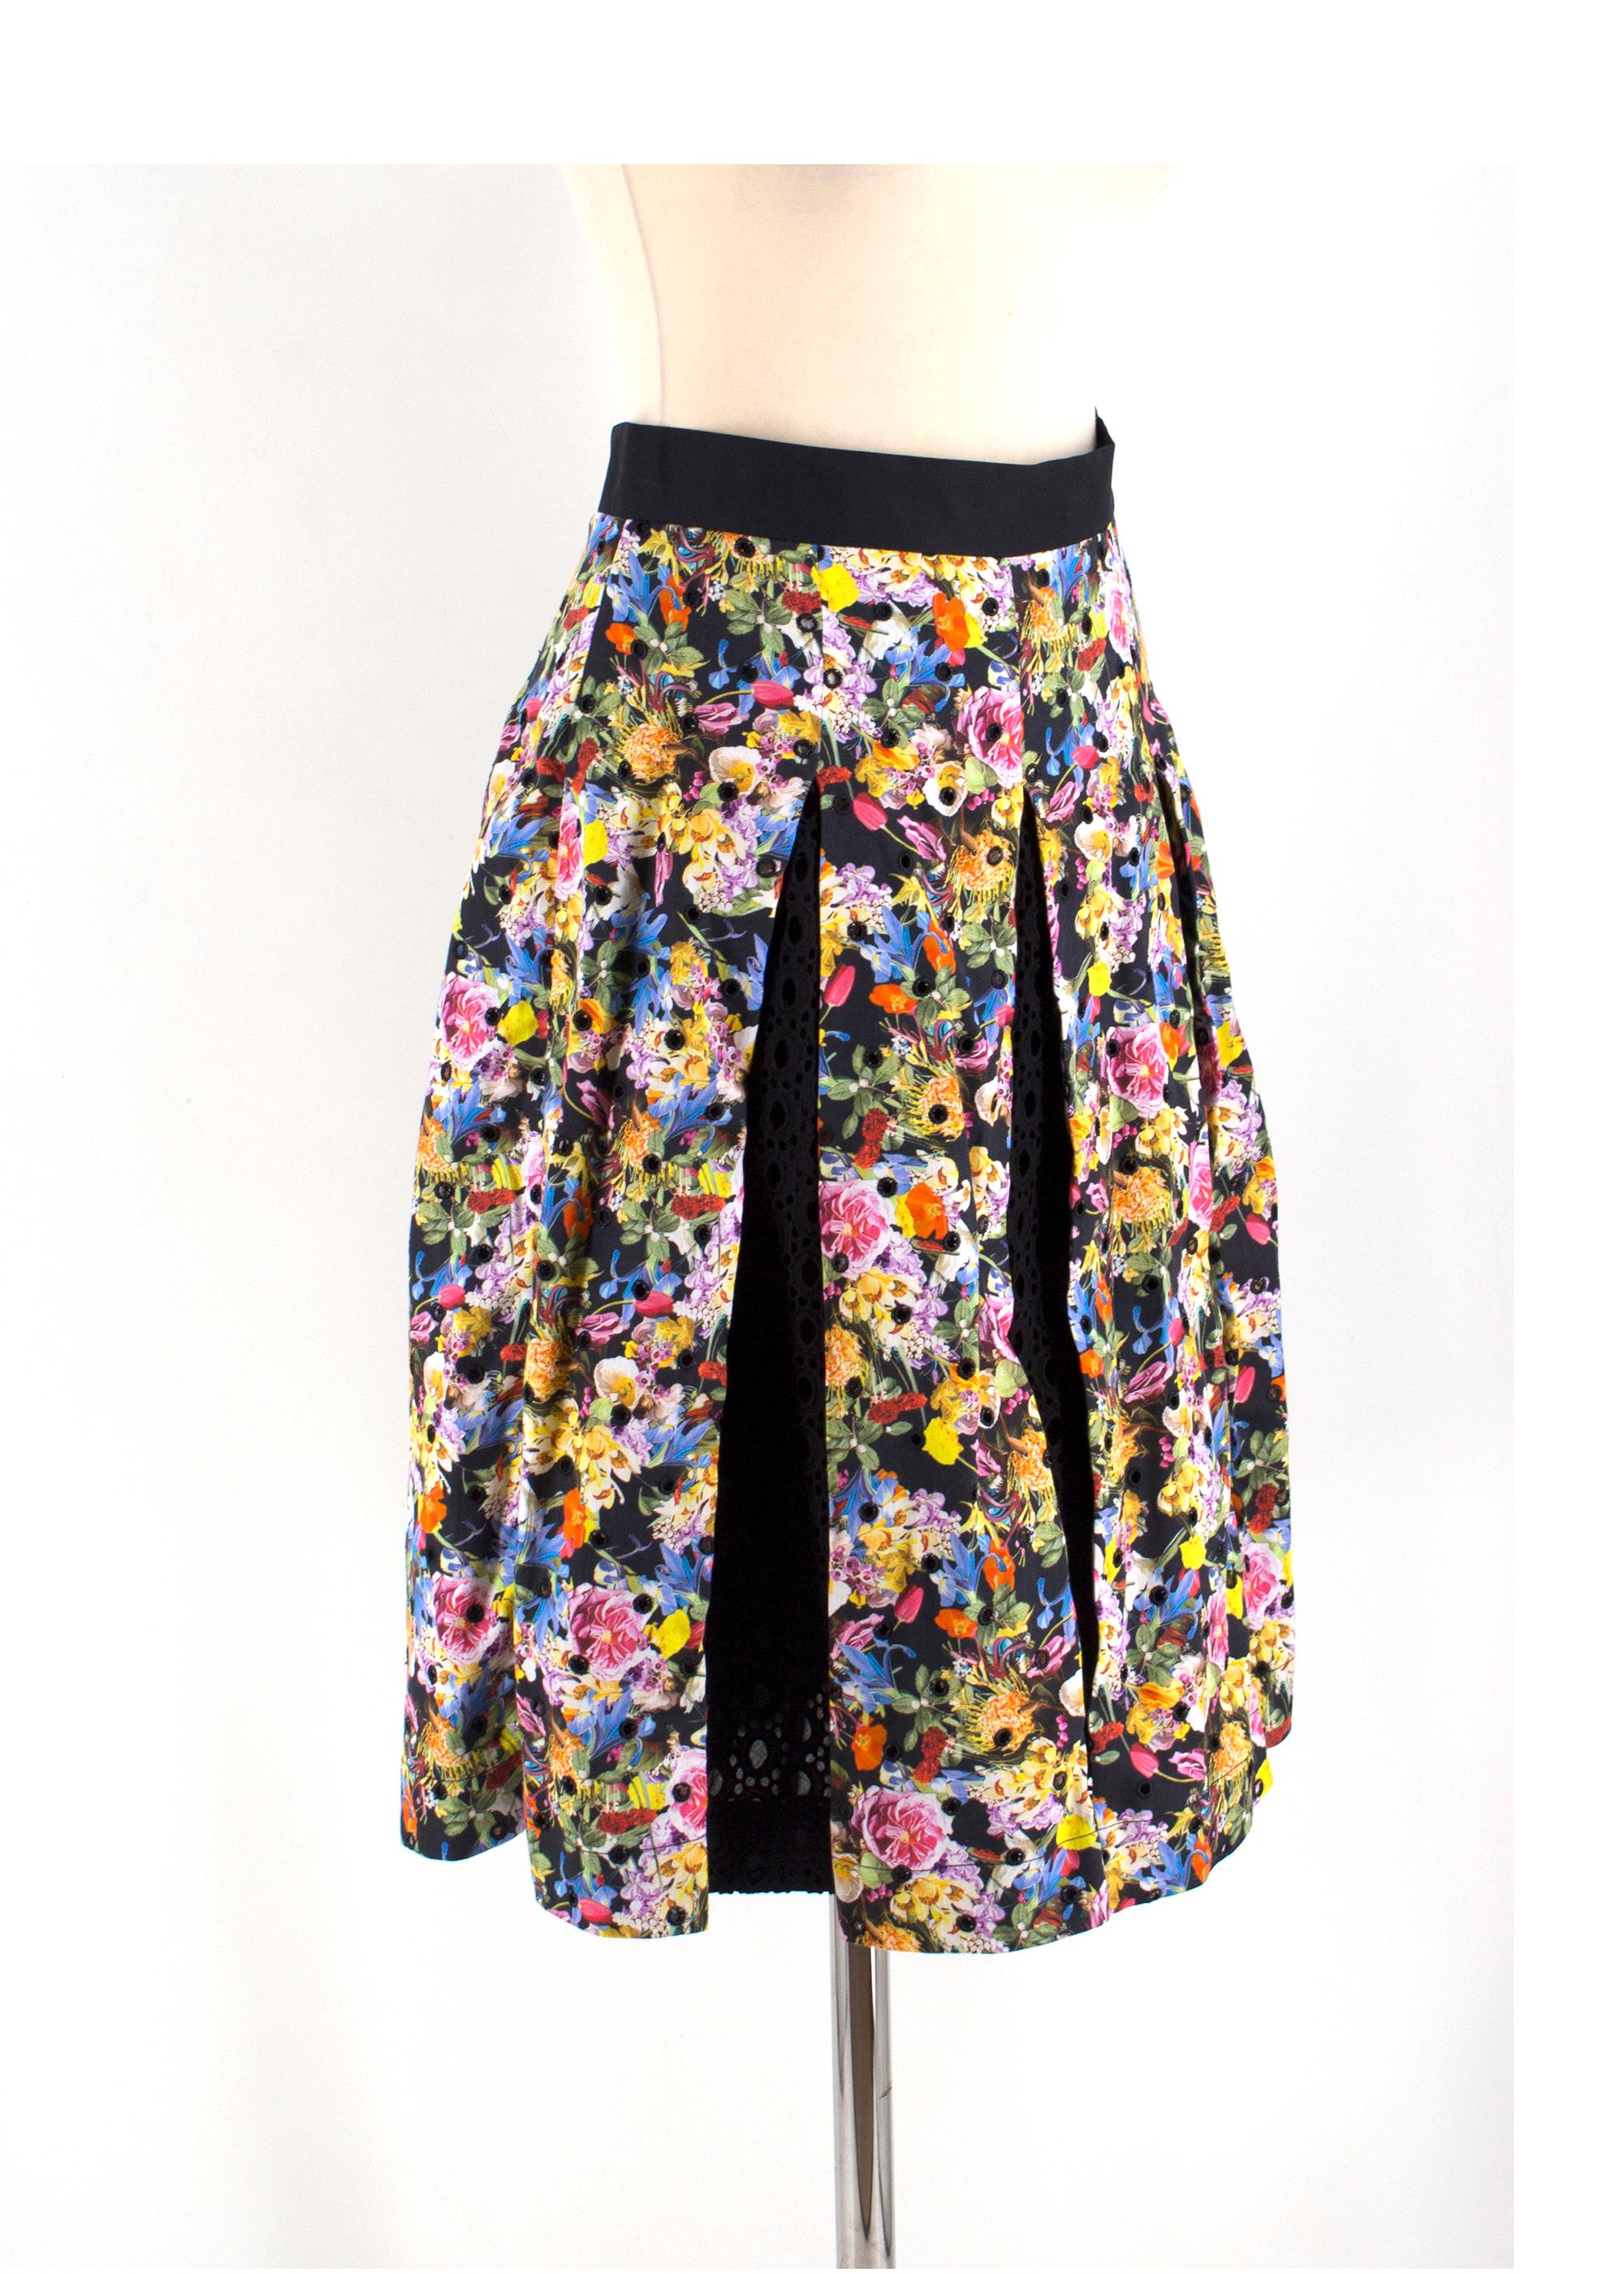 Mary Katrantzou Black Floral Crochet Midi Skirt

-Black skirt with multicoloured floral pattern
-Features black crochet panels
-Eyelet cut outs
-Side zip closure

Please note, these items are pre-owned and may show signs of being stored even when